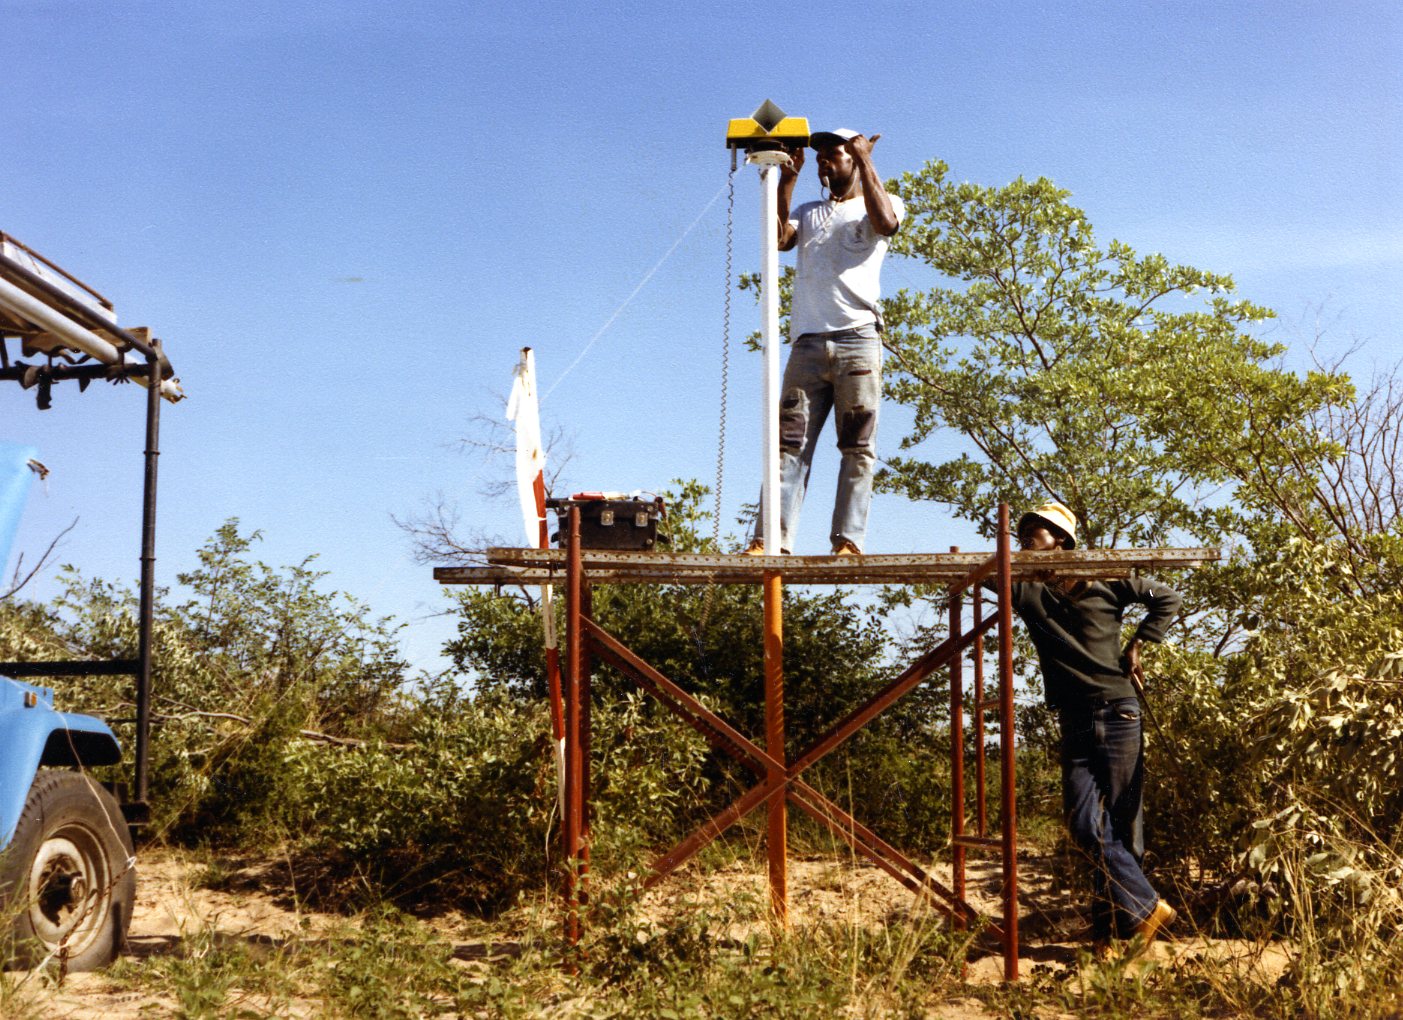 survey crew in Namibia in the 1980's